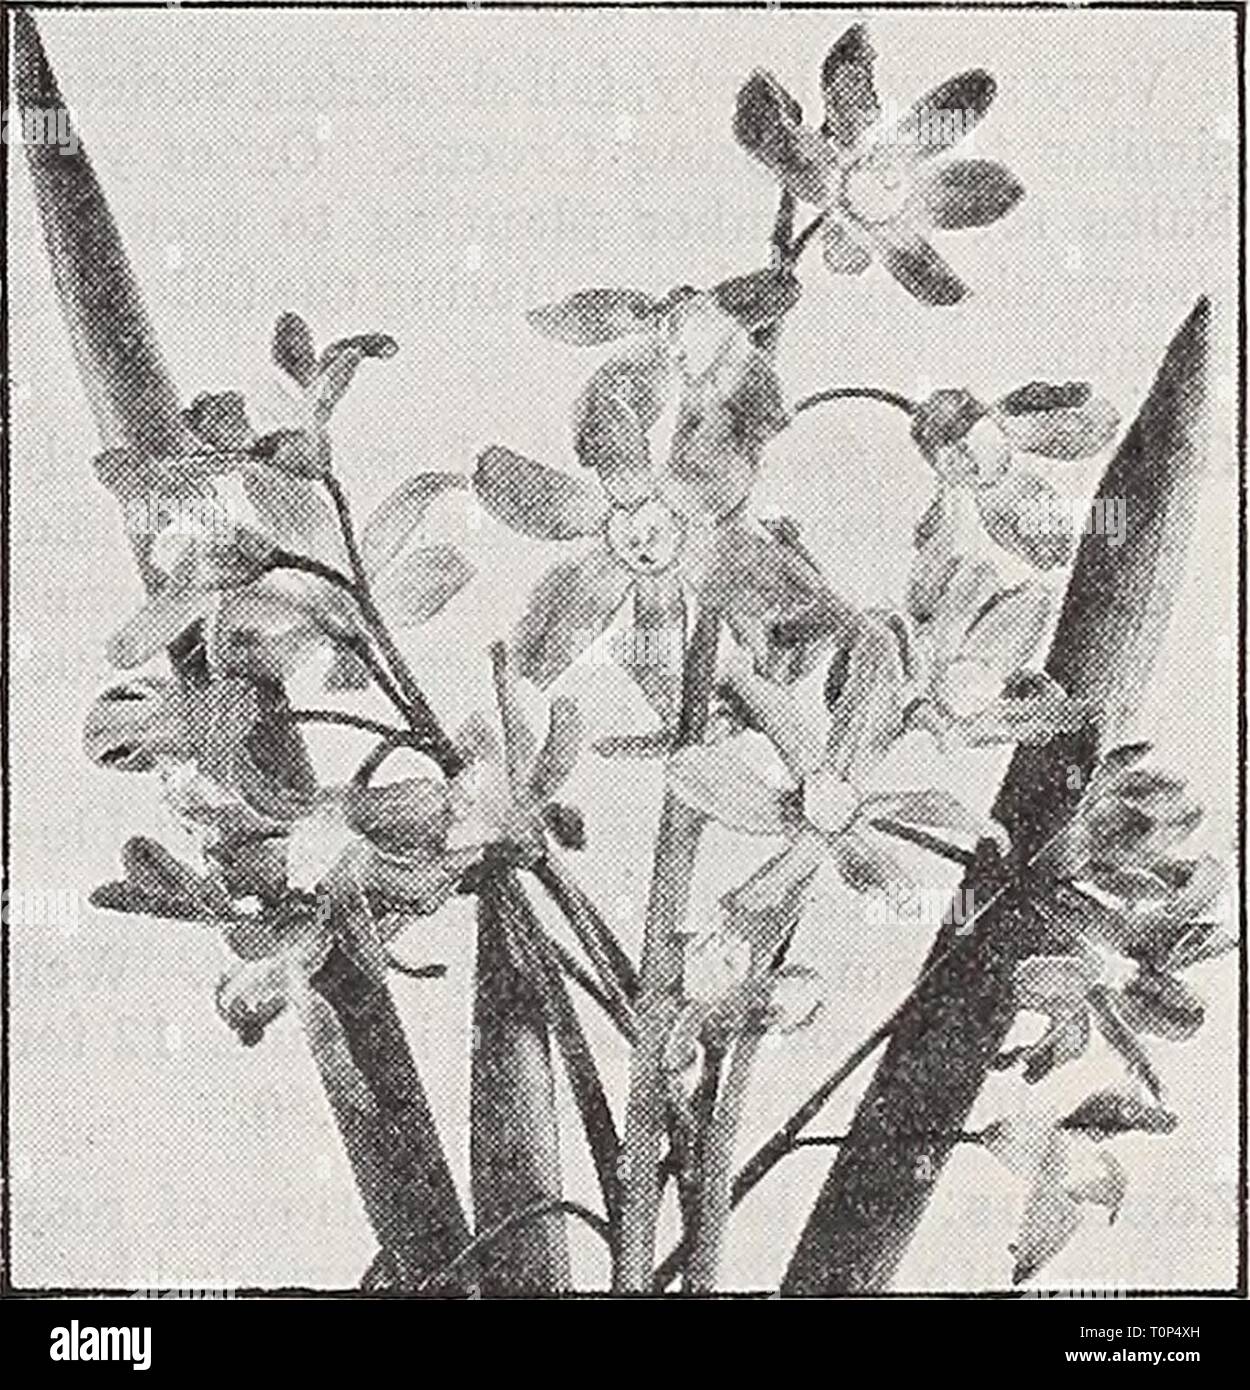 Dreer's bulbs, plants, roses, shrubs, Dreer's bulbs, plants, roses, shrubs, seeds for autumn planting 1938  dreersbulbsplant1938henr Year: 1938  Chionodoxa Luciliae has graceful '1 O fof large blooms of deep sky blue 'â ^J'-' sliading to white in the center. ^^ir*    Chionodoxa sardensis brings to 10 fQf the spring garden lovely flowers of *-^ J a rich deep blue year after year. ^Oo Stock Photo